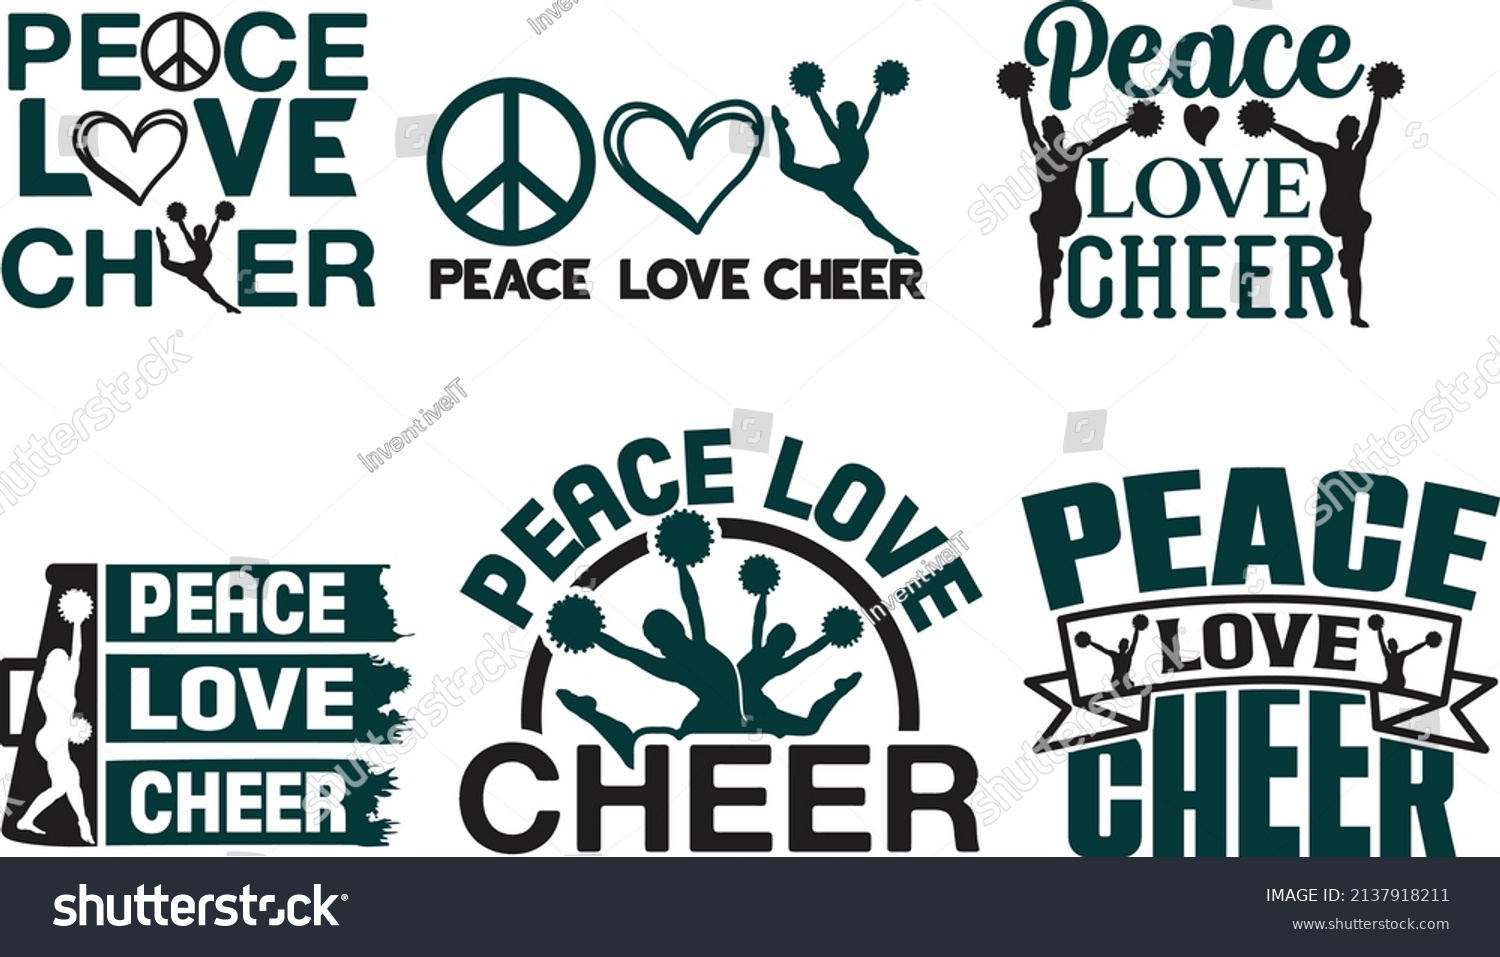 SVG of Peace Love Cheer Holiday Printable Vector Illustration svg